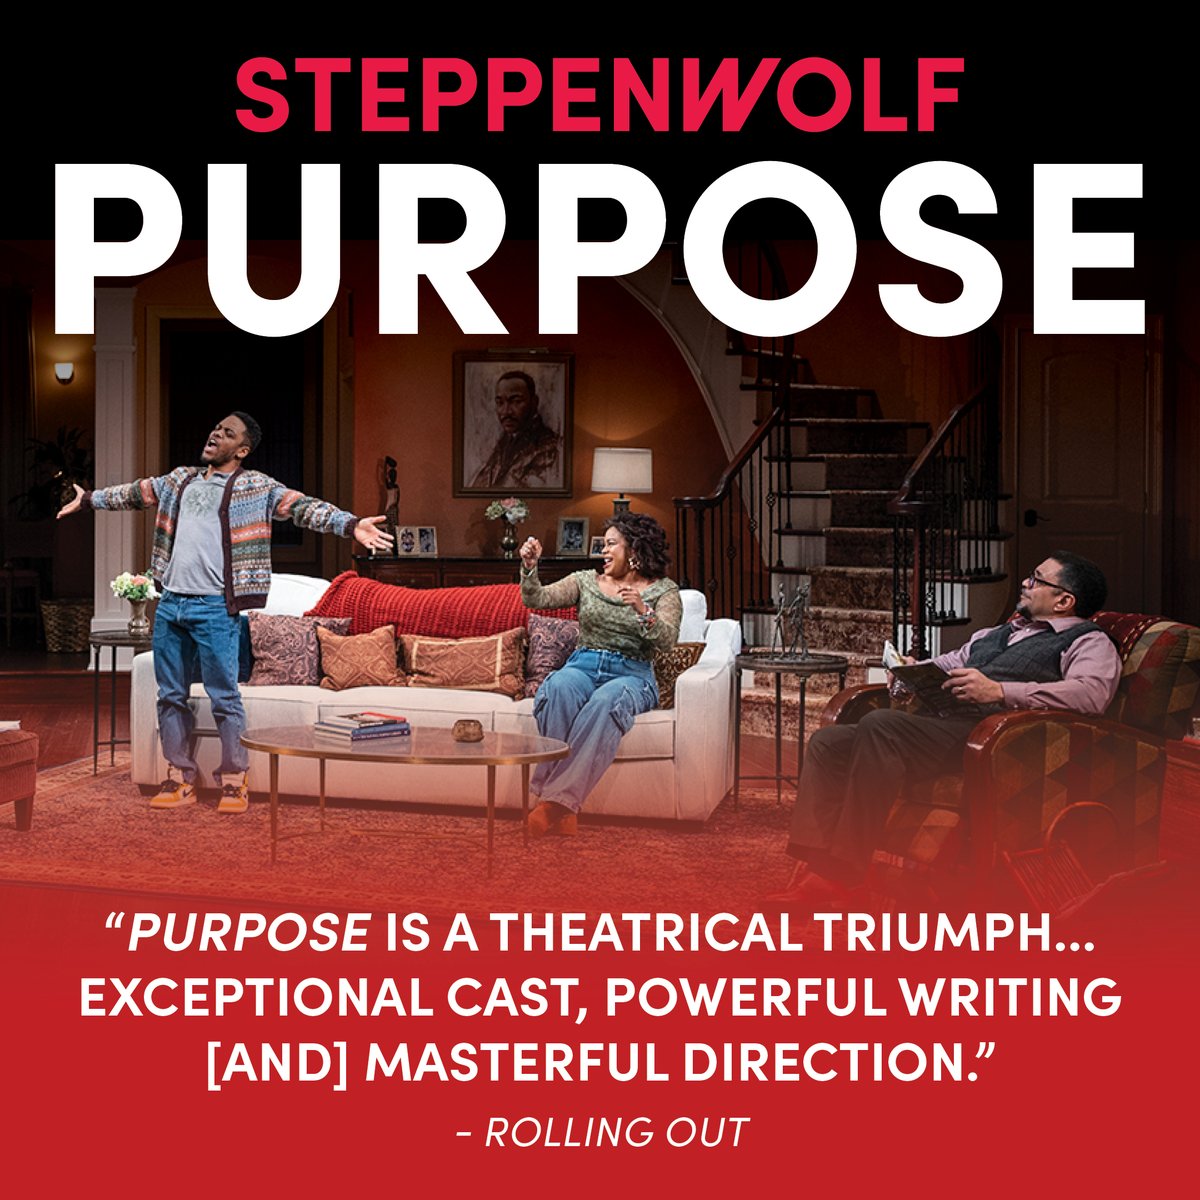 This week is almost SOLD OUT! Get your tickets for this 'theatrical triumph' now. steppenwolf.org/purpose #PurposeSTC #chicago #theatre #chicagotheatre #chicagoart #blackart #blackfamily #familydrama #comedy #blackexcellence